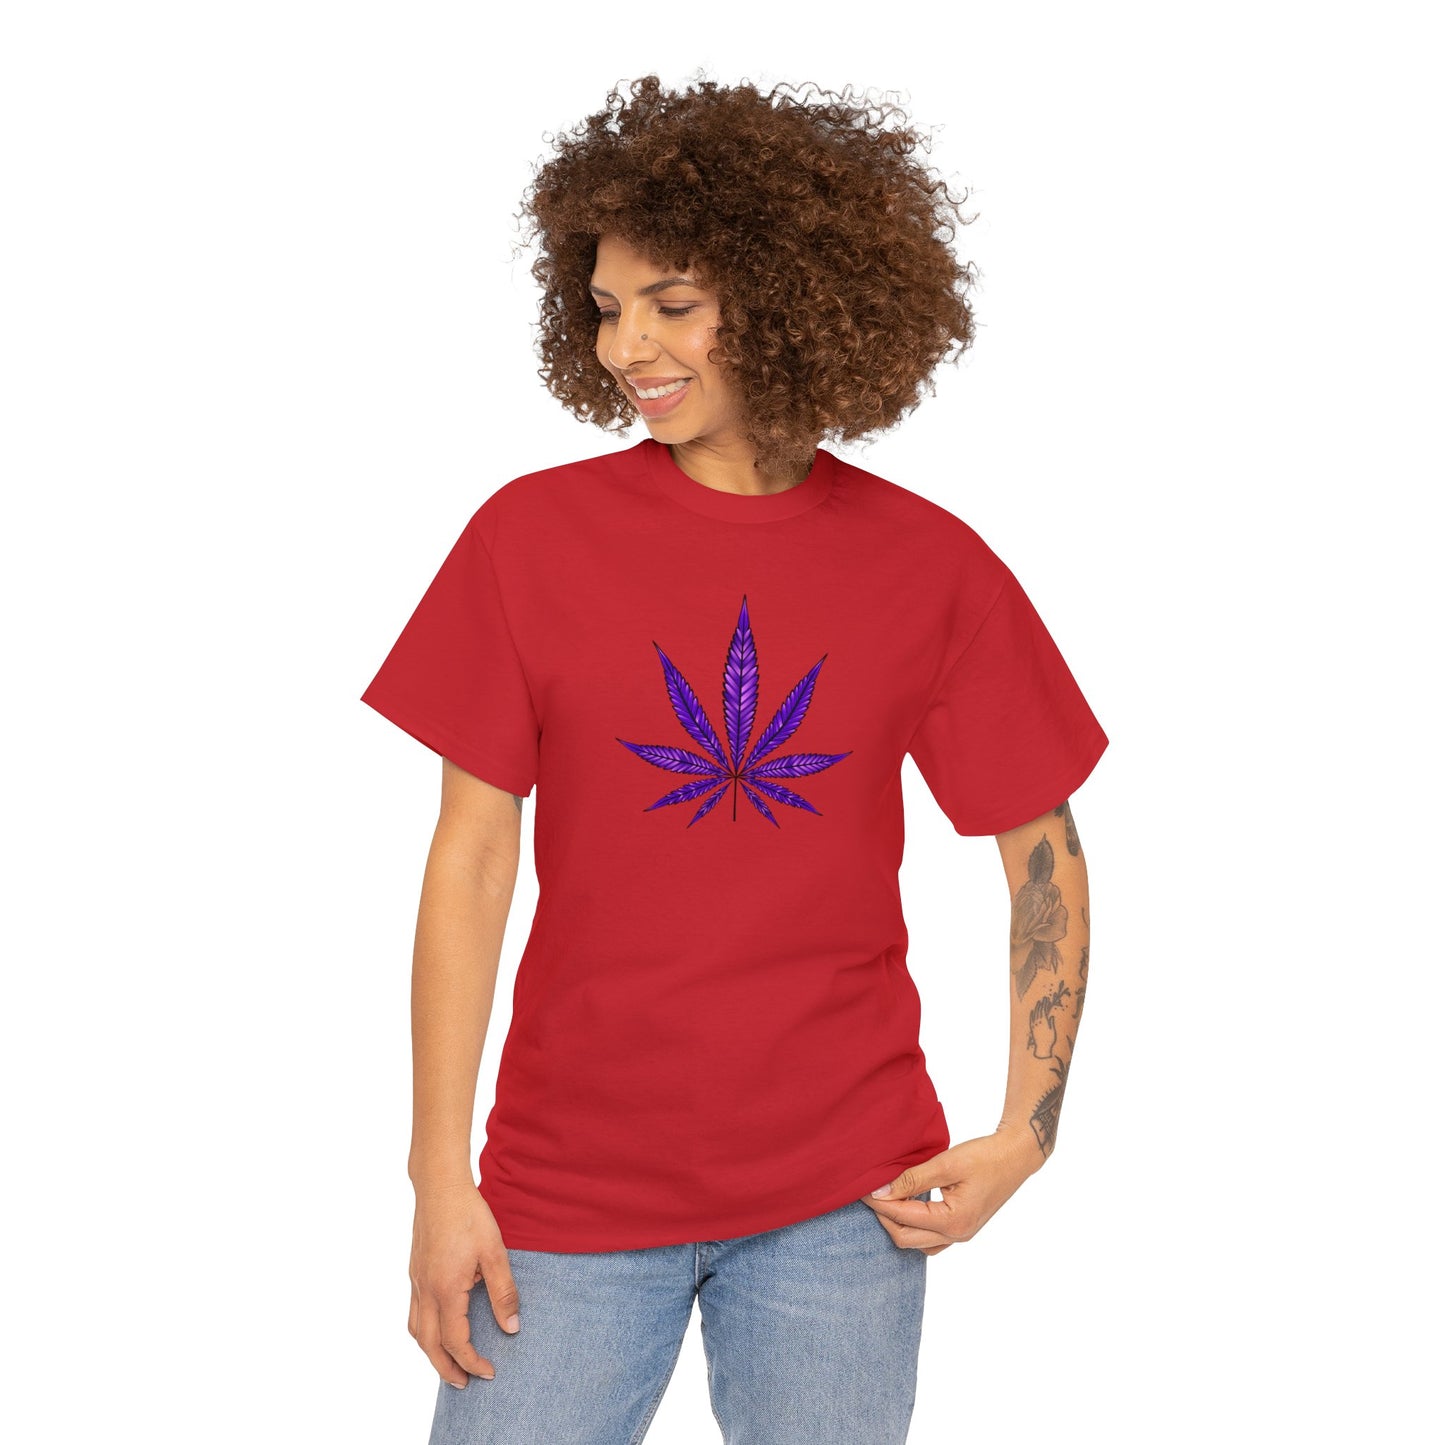 A woman wearing a Purple Cannabis Leaf Tee with a vibrant color stands against a white background, with her left hand resting on her hip.